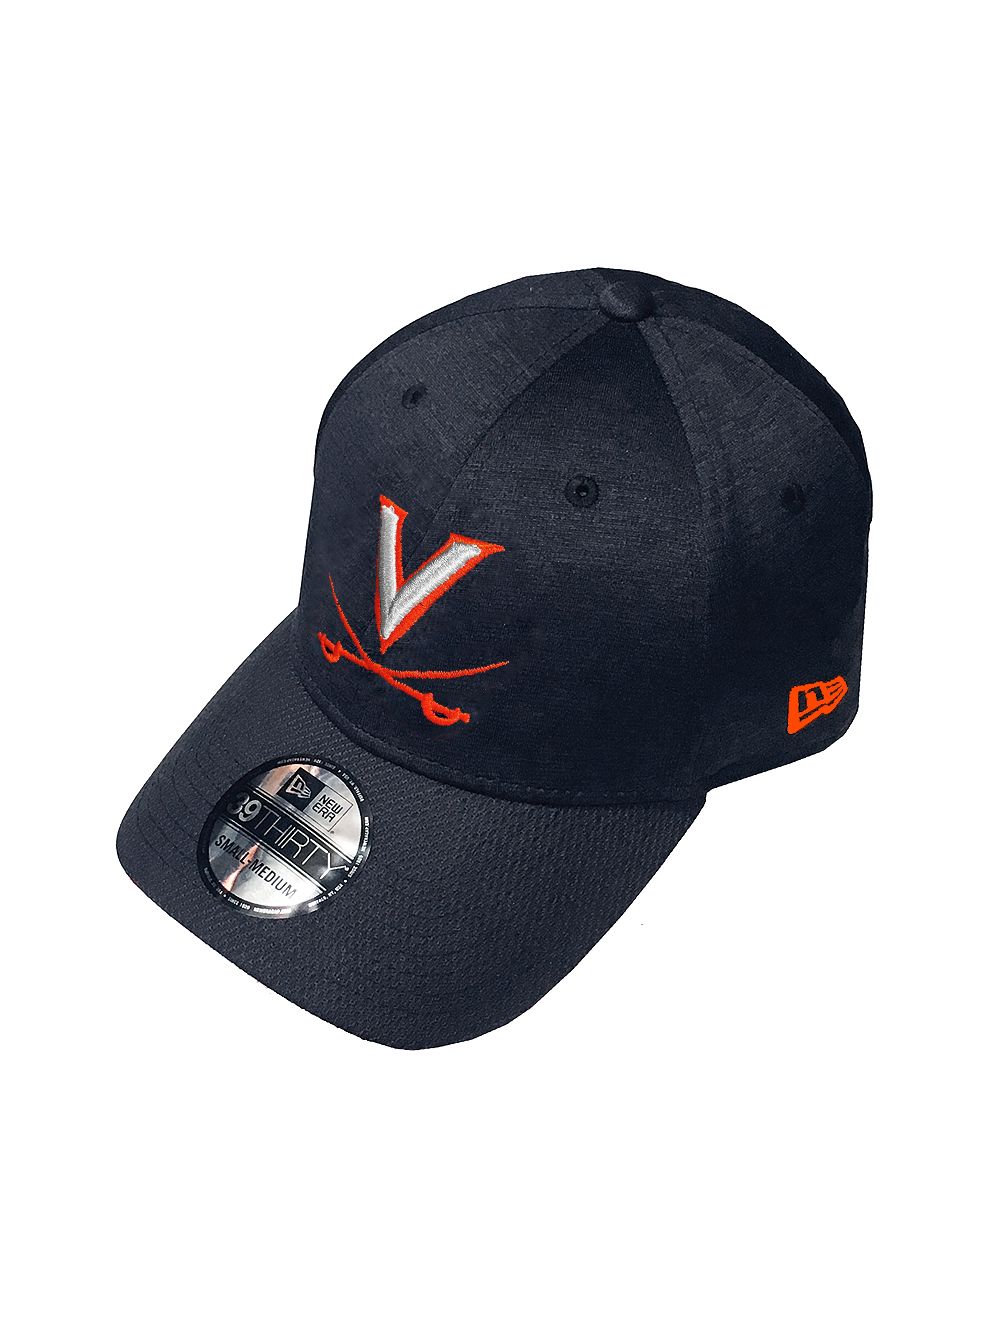 Embroidery & Fitteds: Low Profile On-Field Fitted